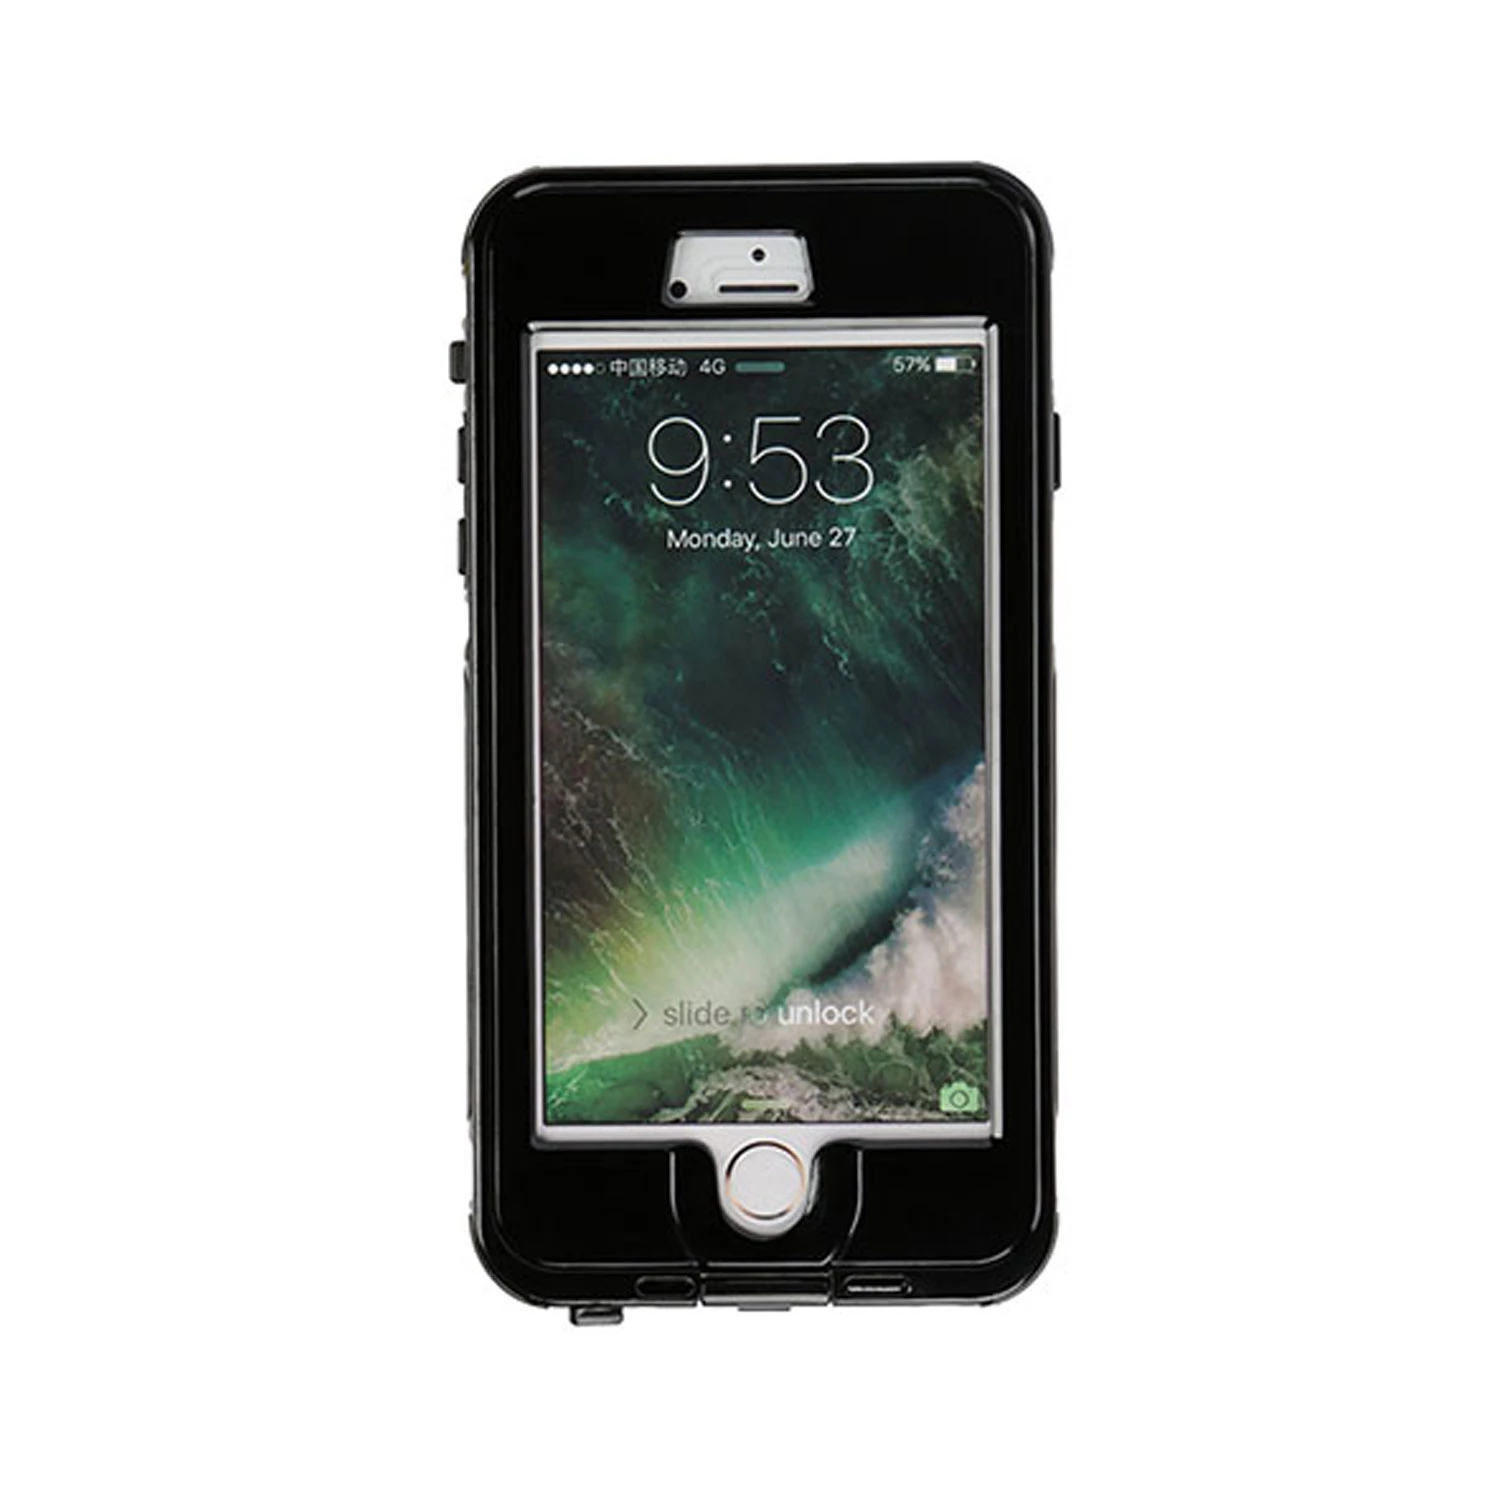 Rugged Water-Proof Hybrid Full Cover Case For iPhone 6s Plus